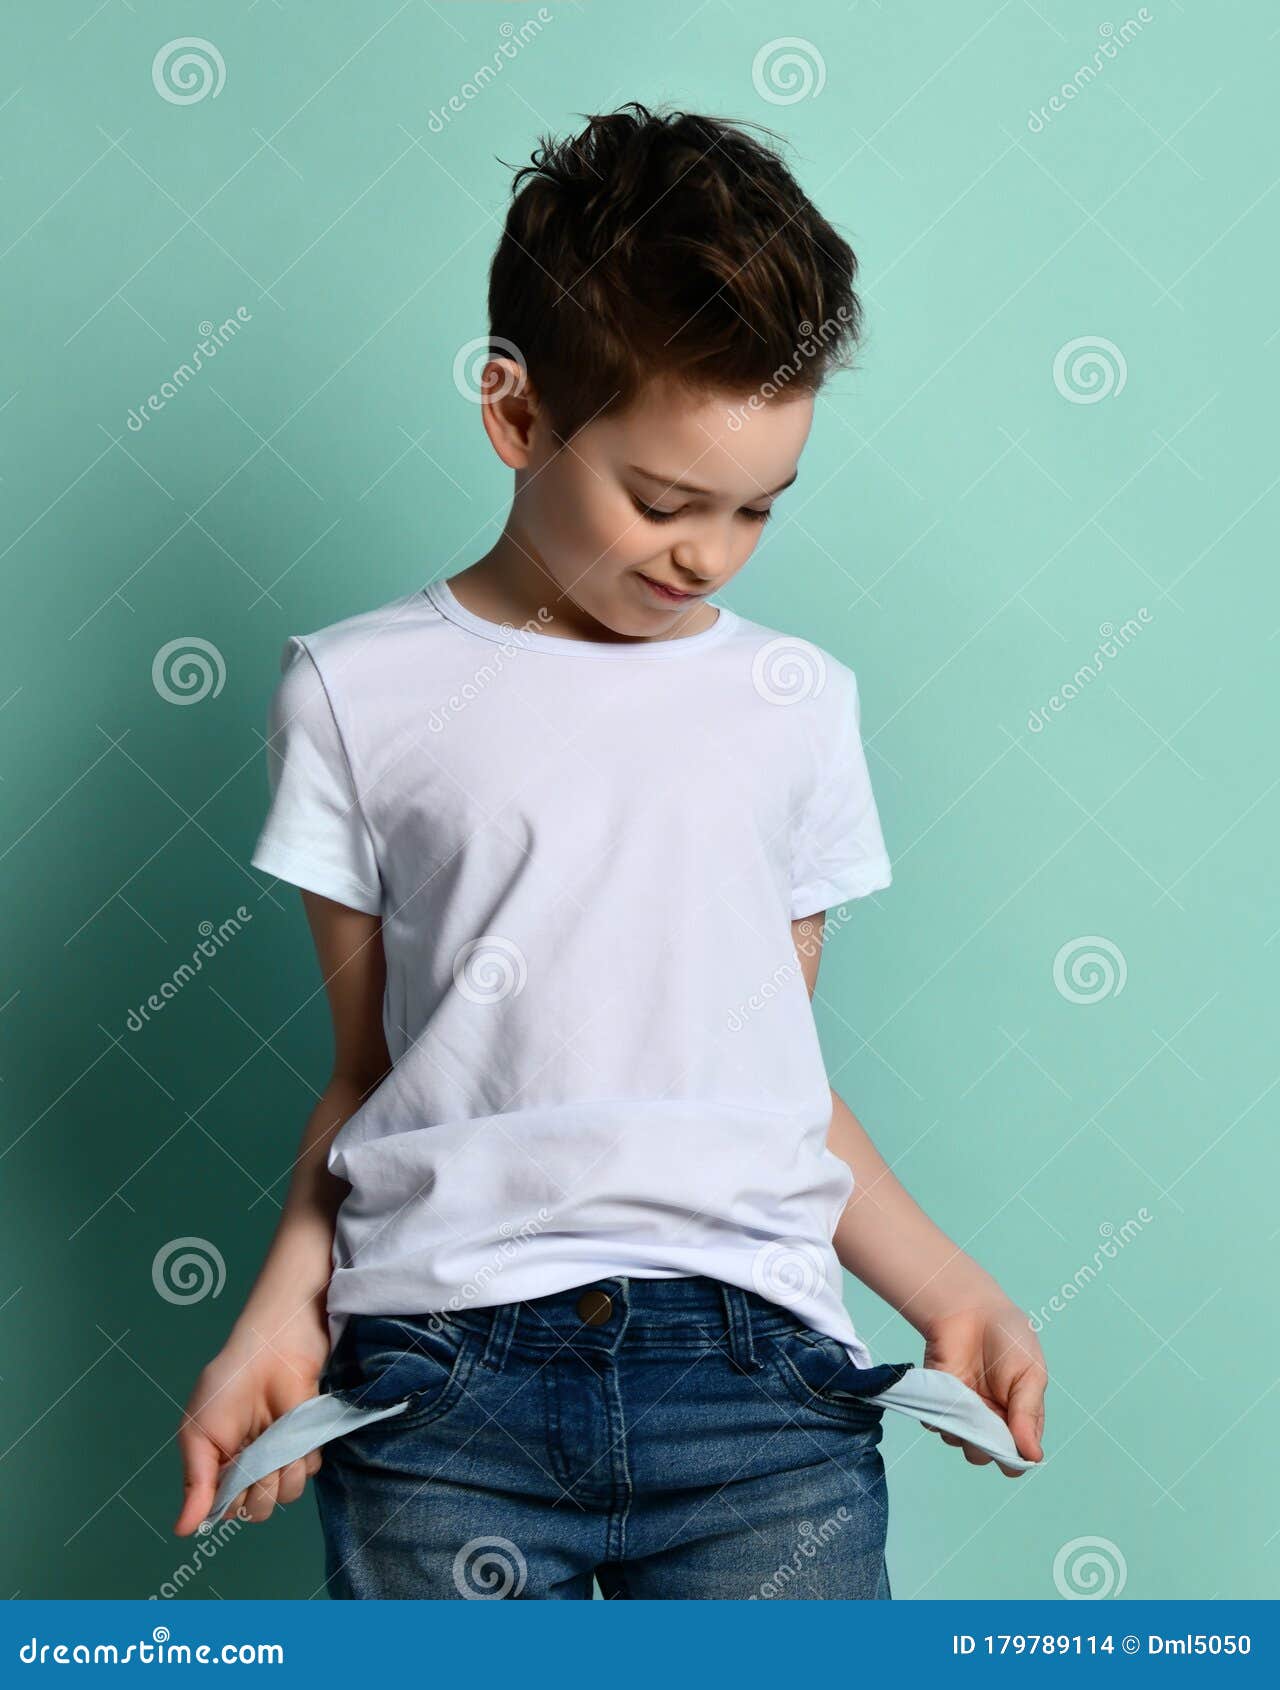 Small Cute Boy with Modern Hairstyle in Stylish Casual Clothing Standing  and Showing Empty Pockets with No Money Concept Stock Photo - Image of  credit, jeans: 179789114